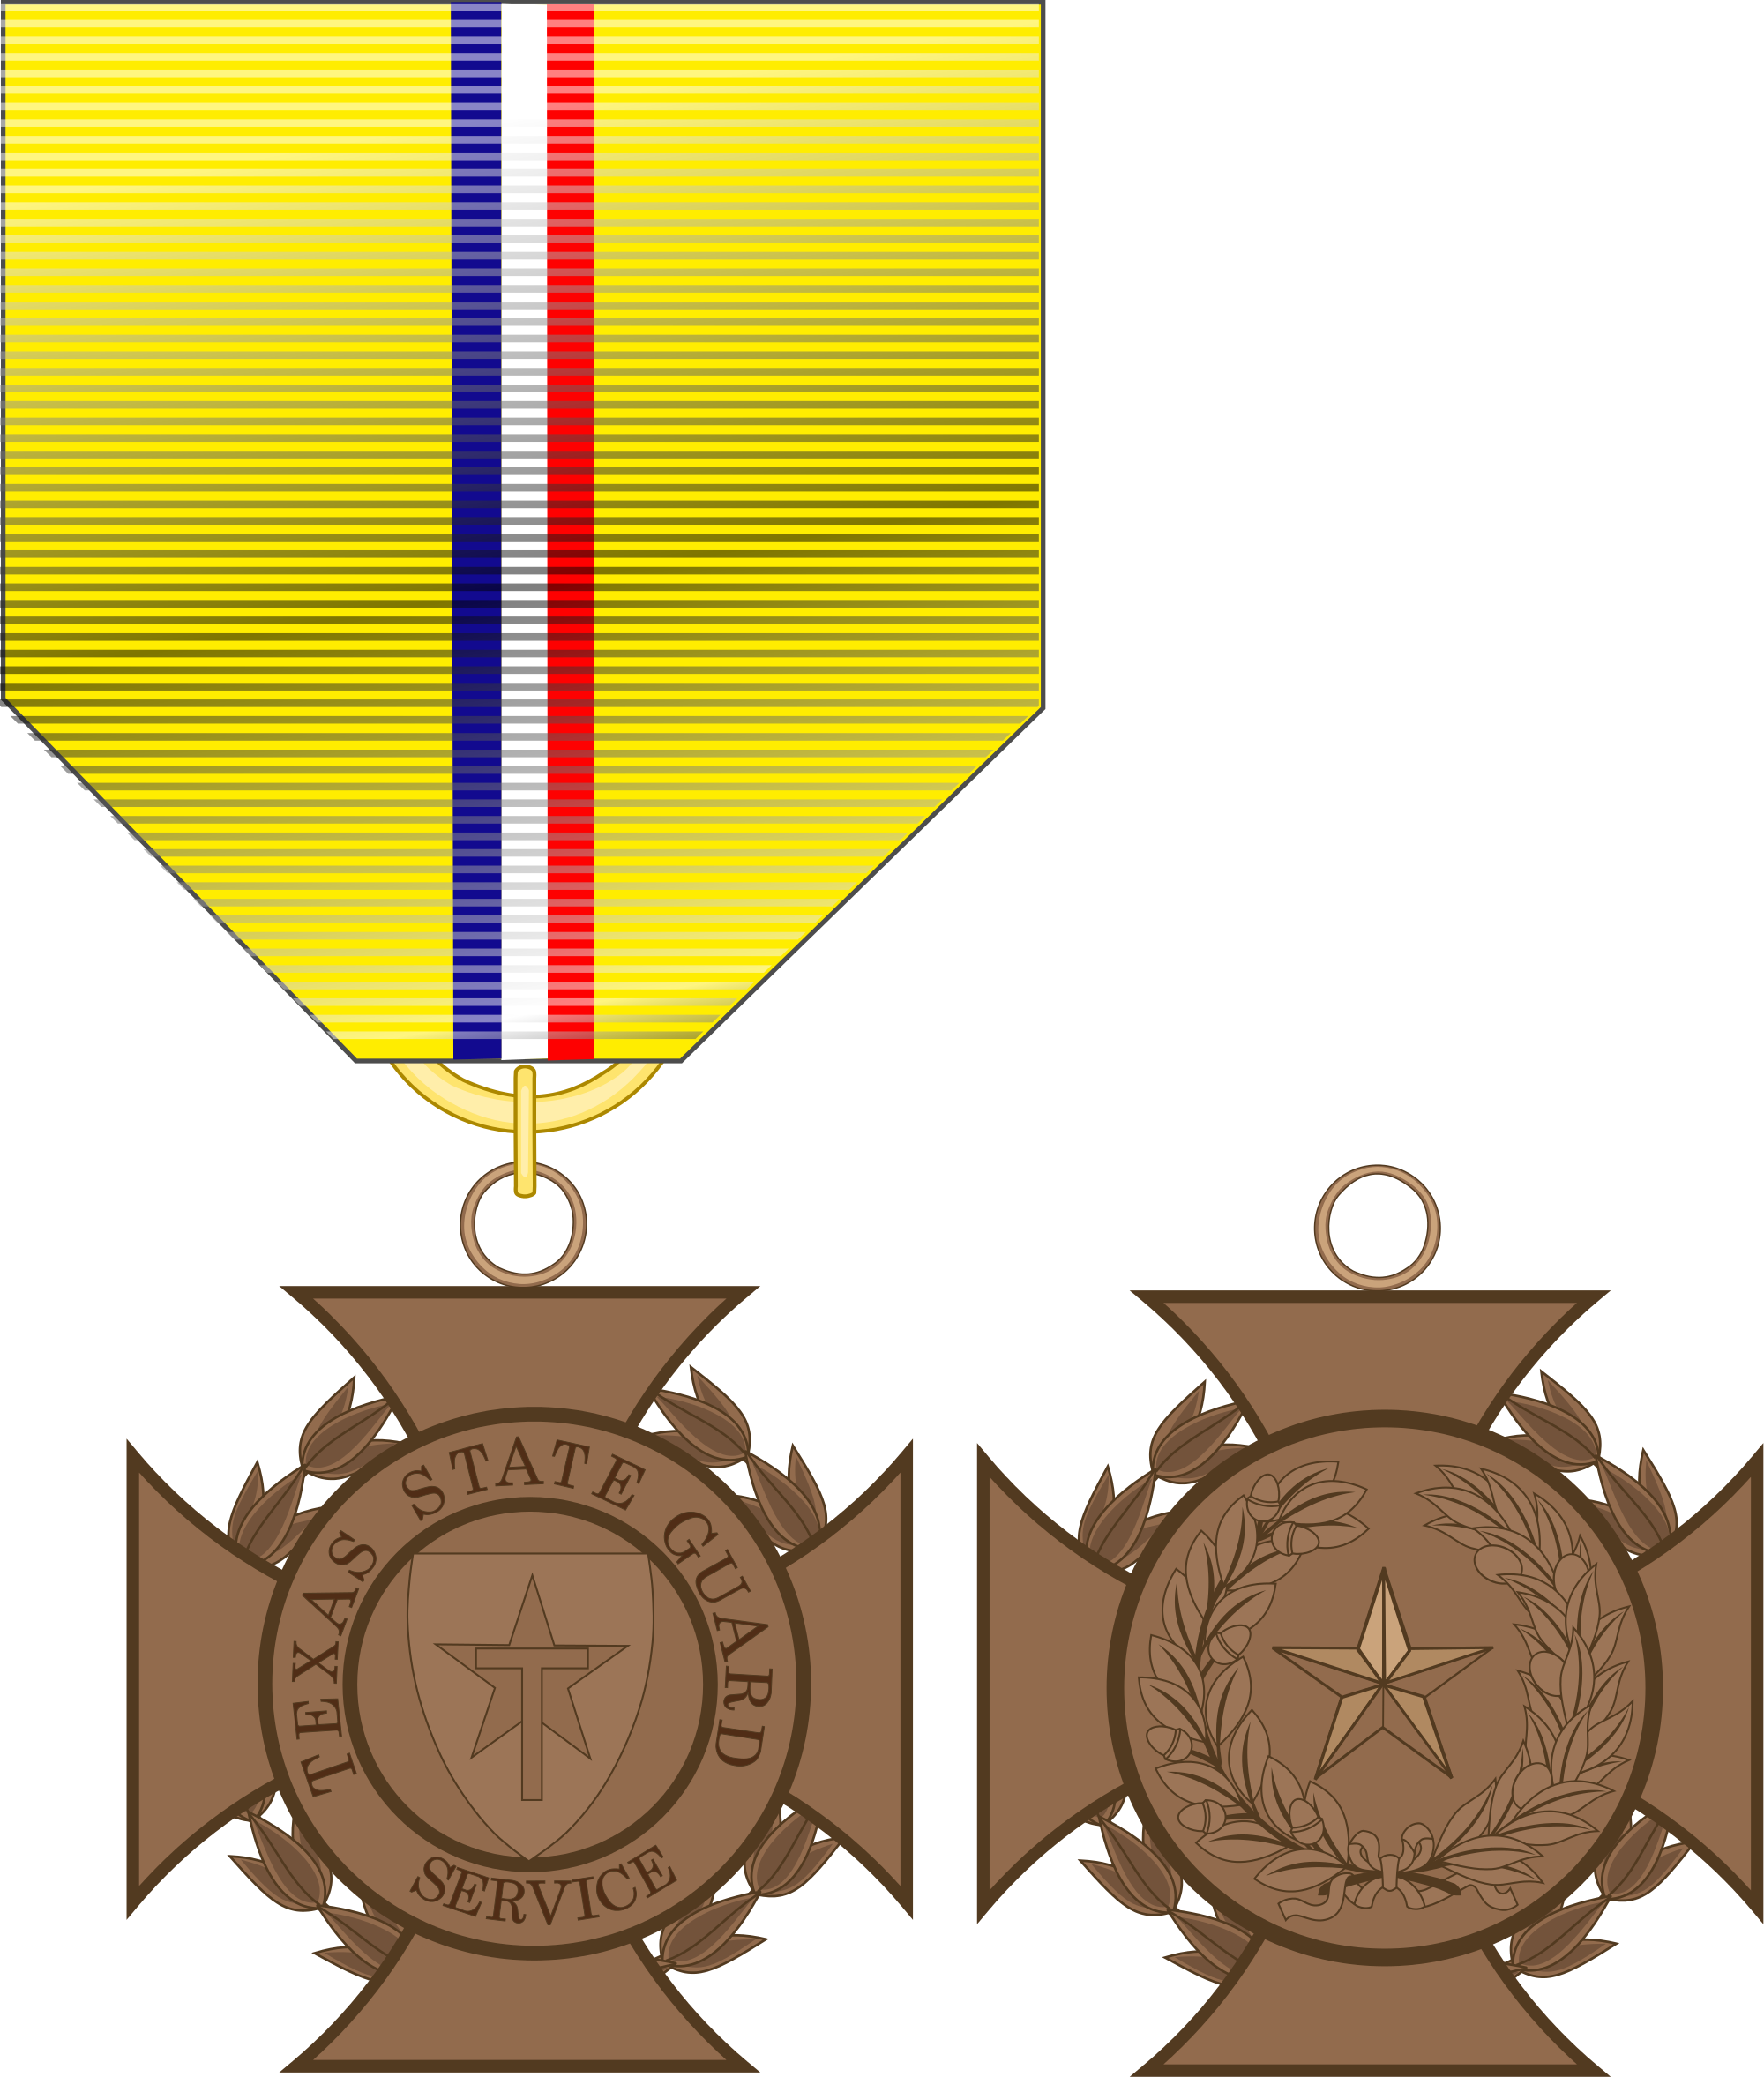 Texas State Guard Medals (2000x2355)